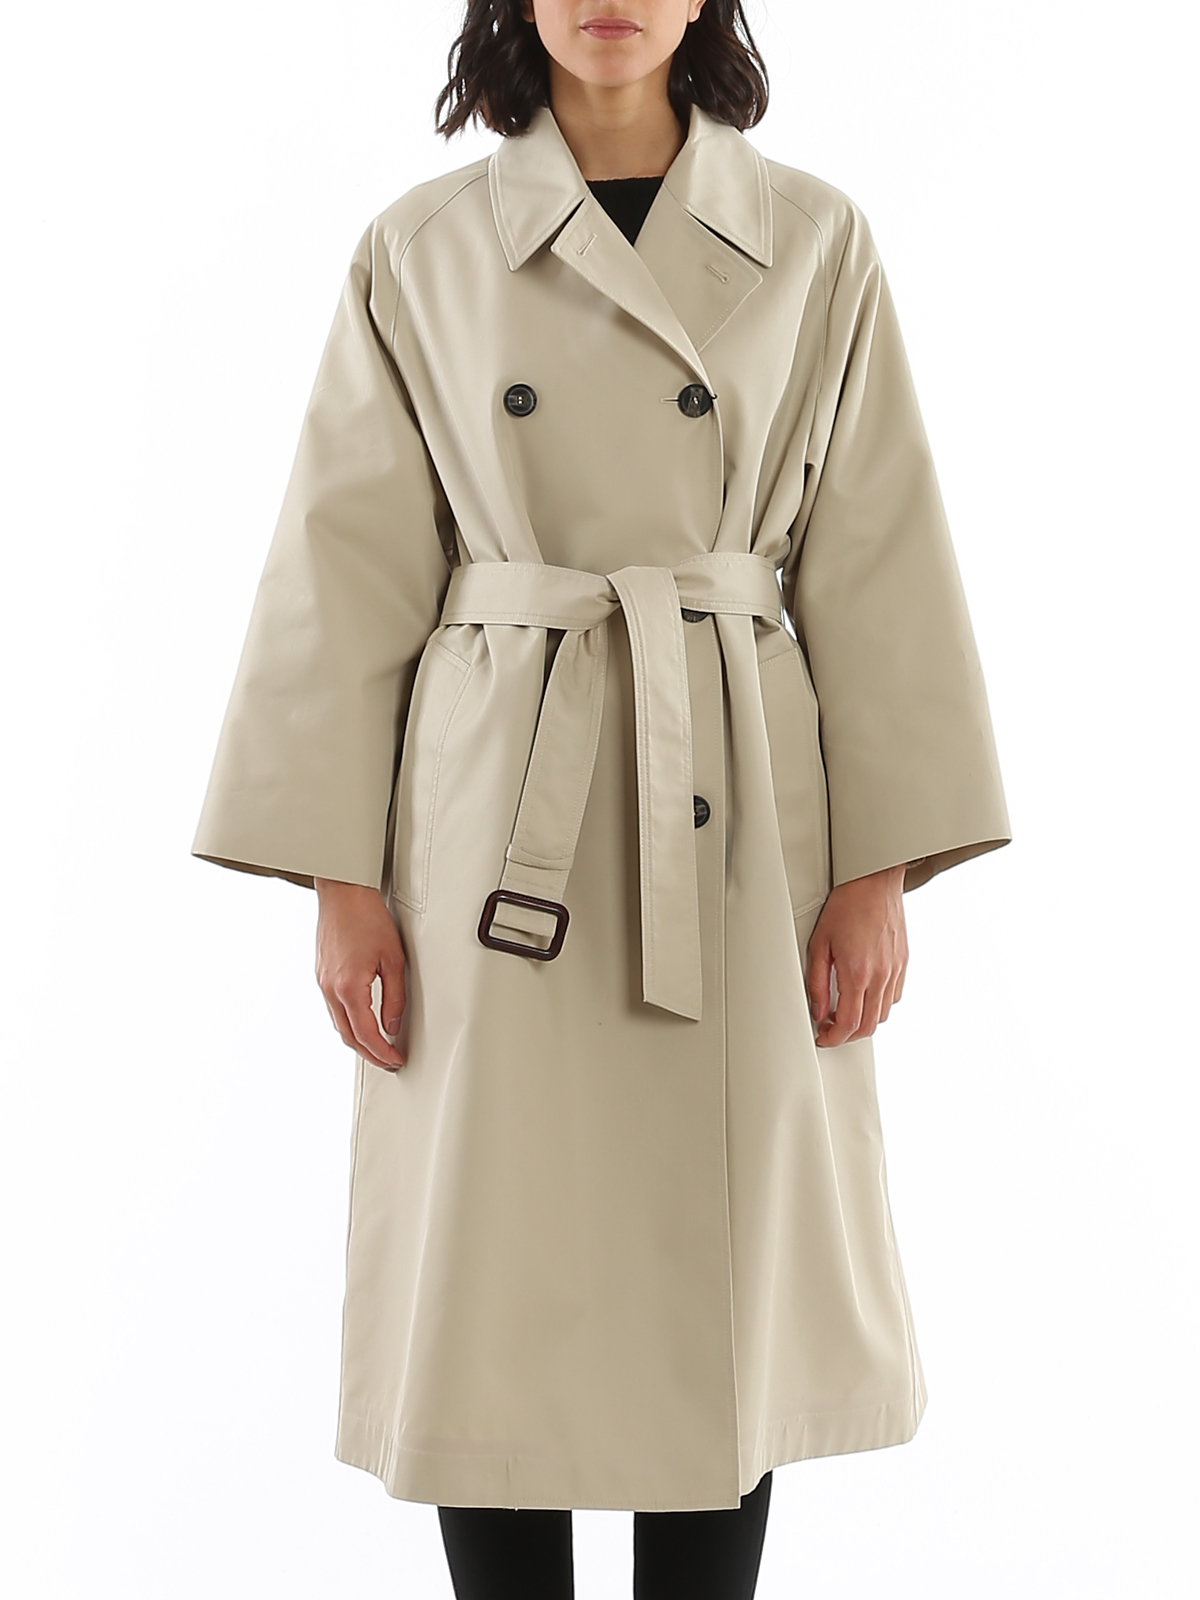 Trench coats Weekend Max Mara - Brio double breasted trench coat ...